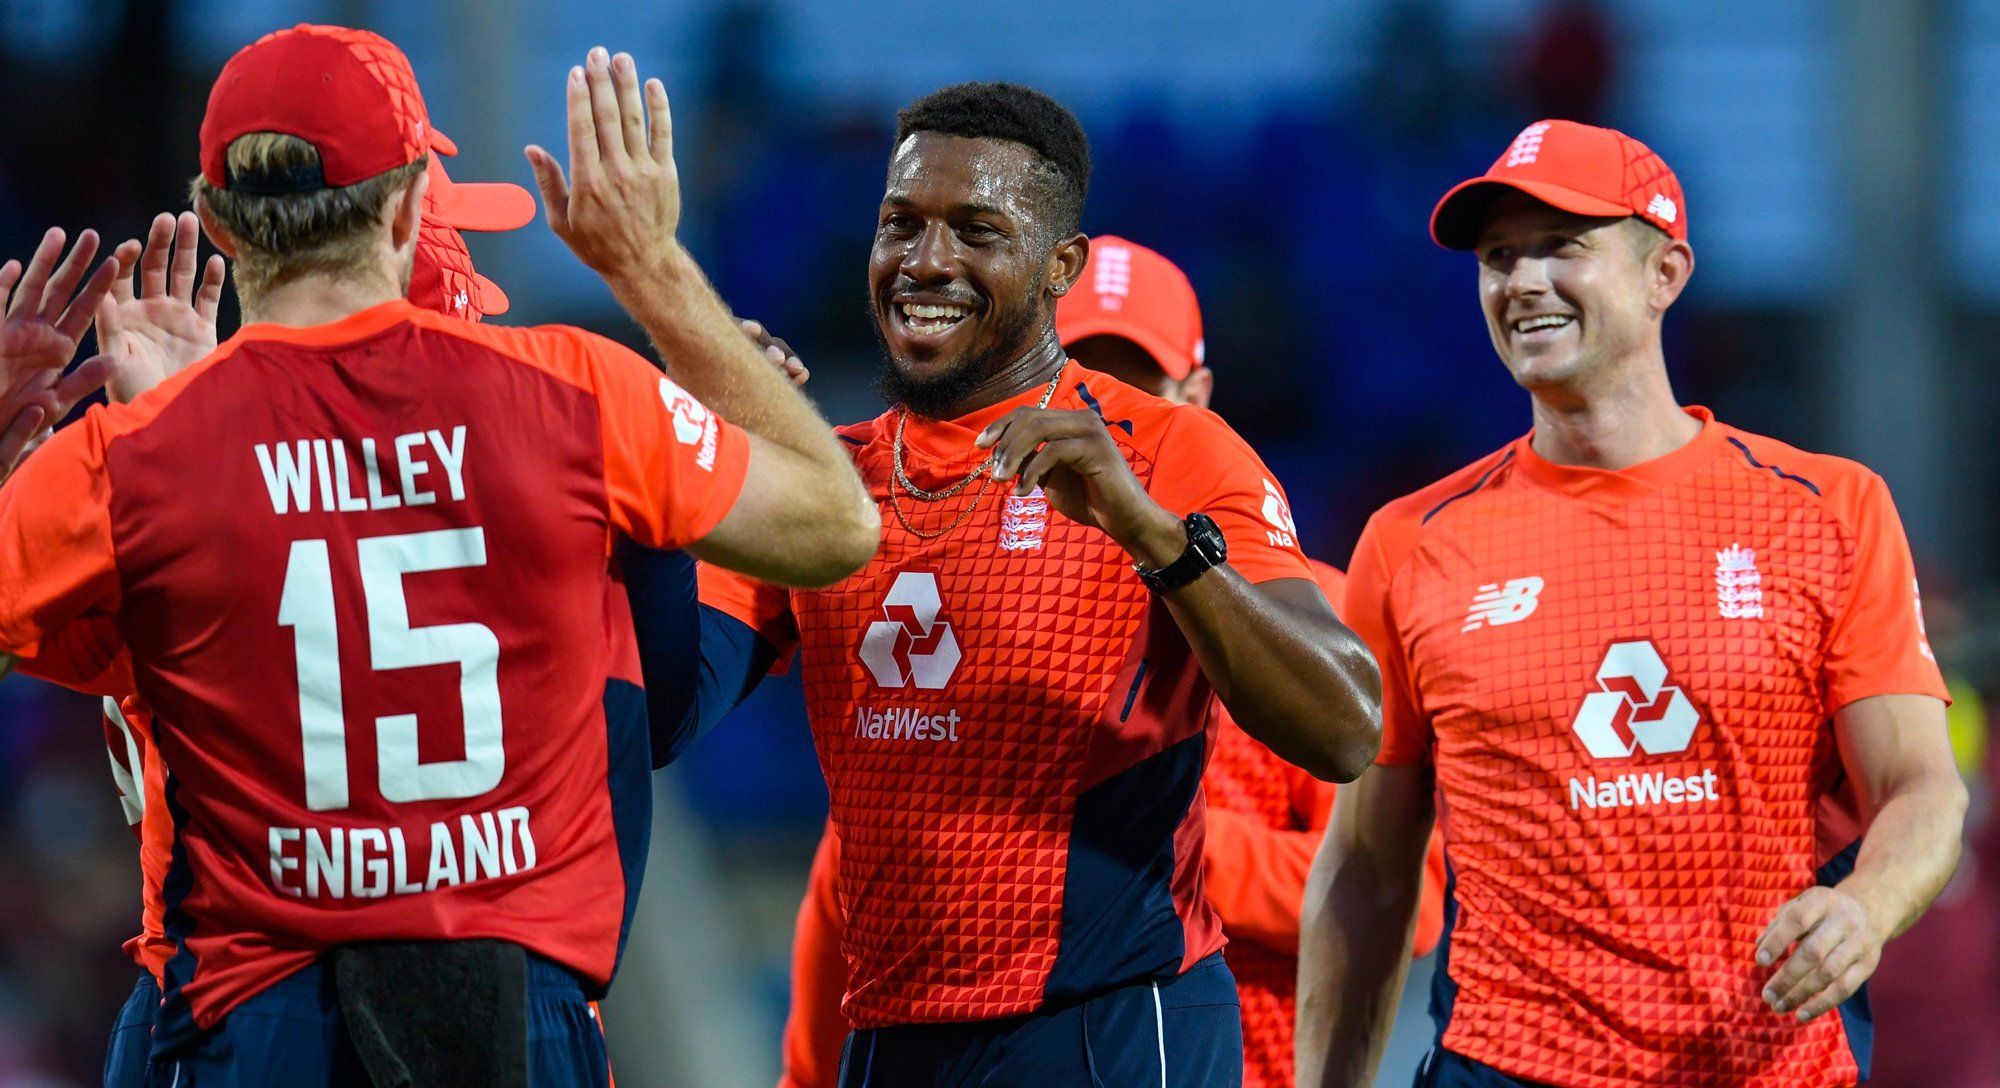 england triumph as west indies crash to second lowest t20 total